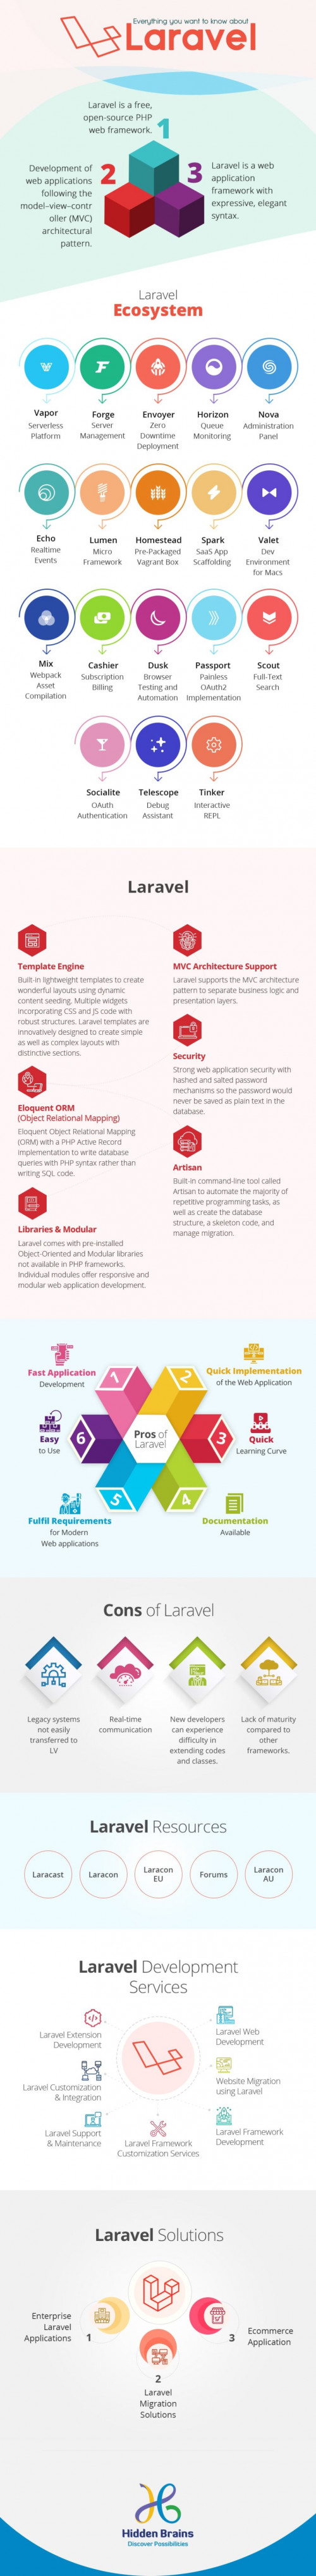 Infographics-Explain-Features-and-Advantages-of-Laravel-scaled.jpg